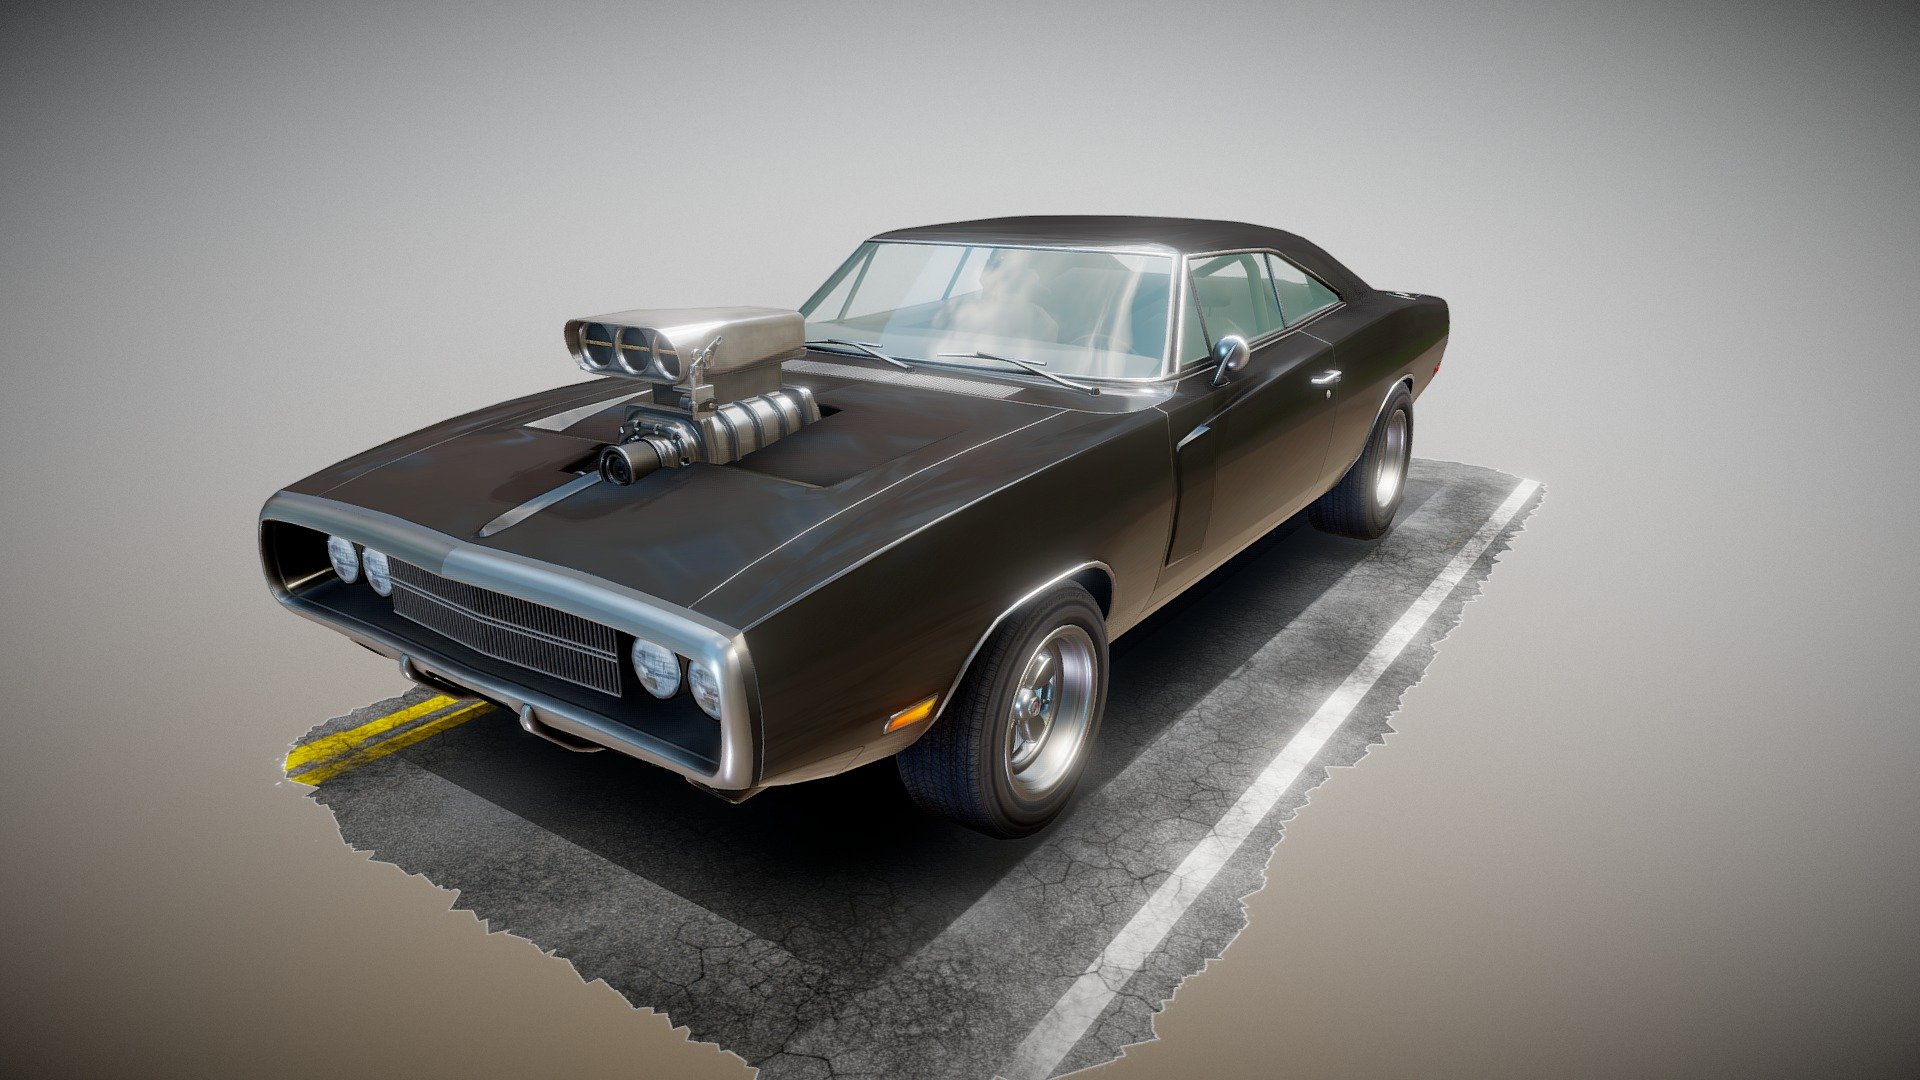 FNF Dom's 1970 Dodge Charger R T Model By Veaceslav Condraciuc [a9dd1d1]